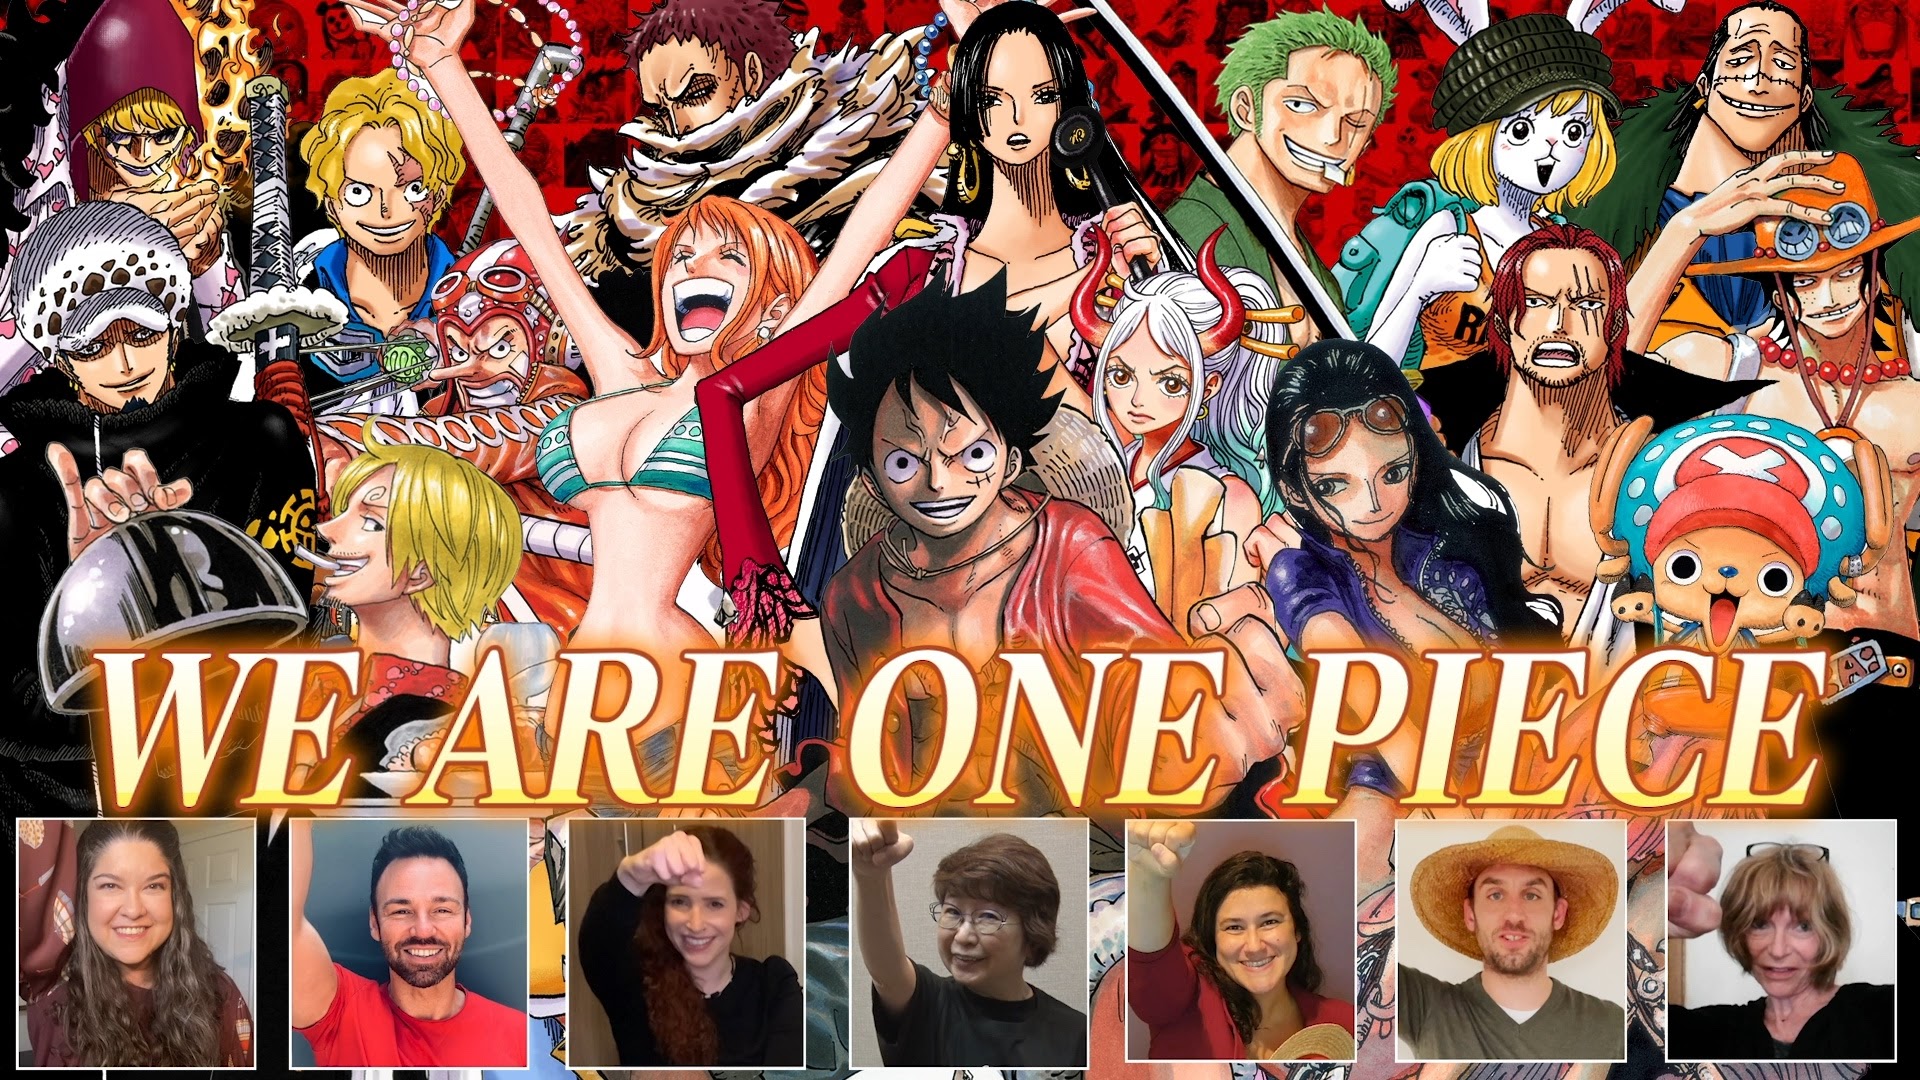 The results are in! One Piece World Top 100 characters chosen in global